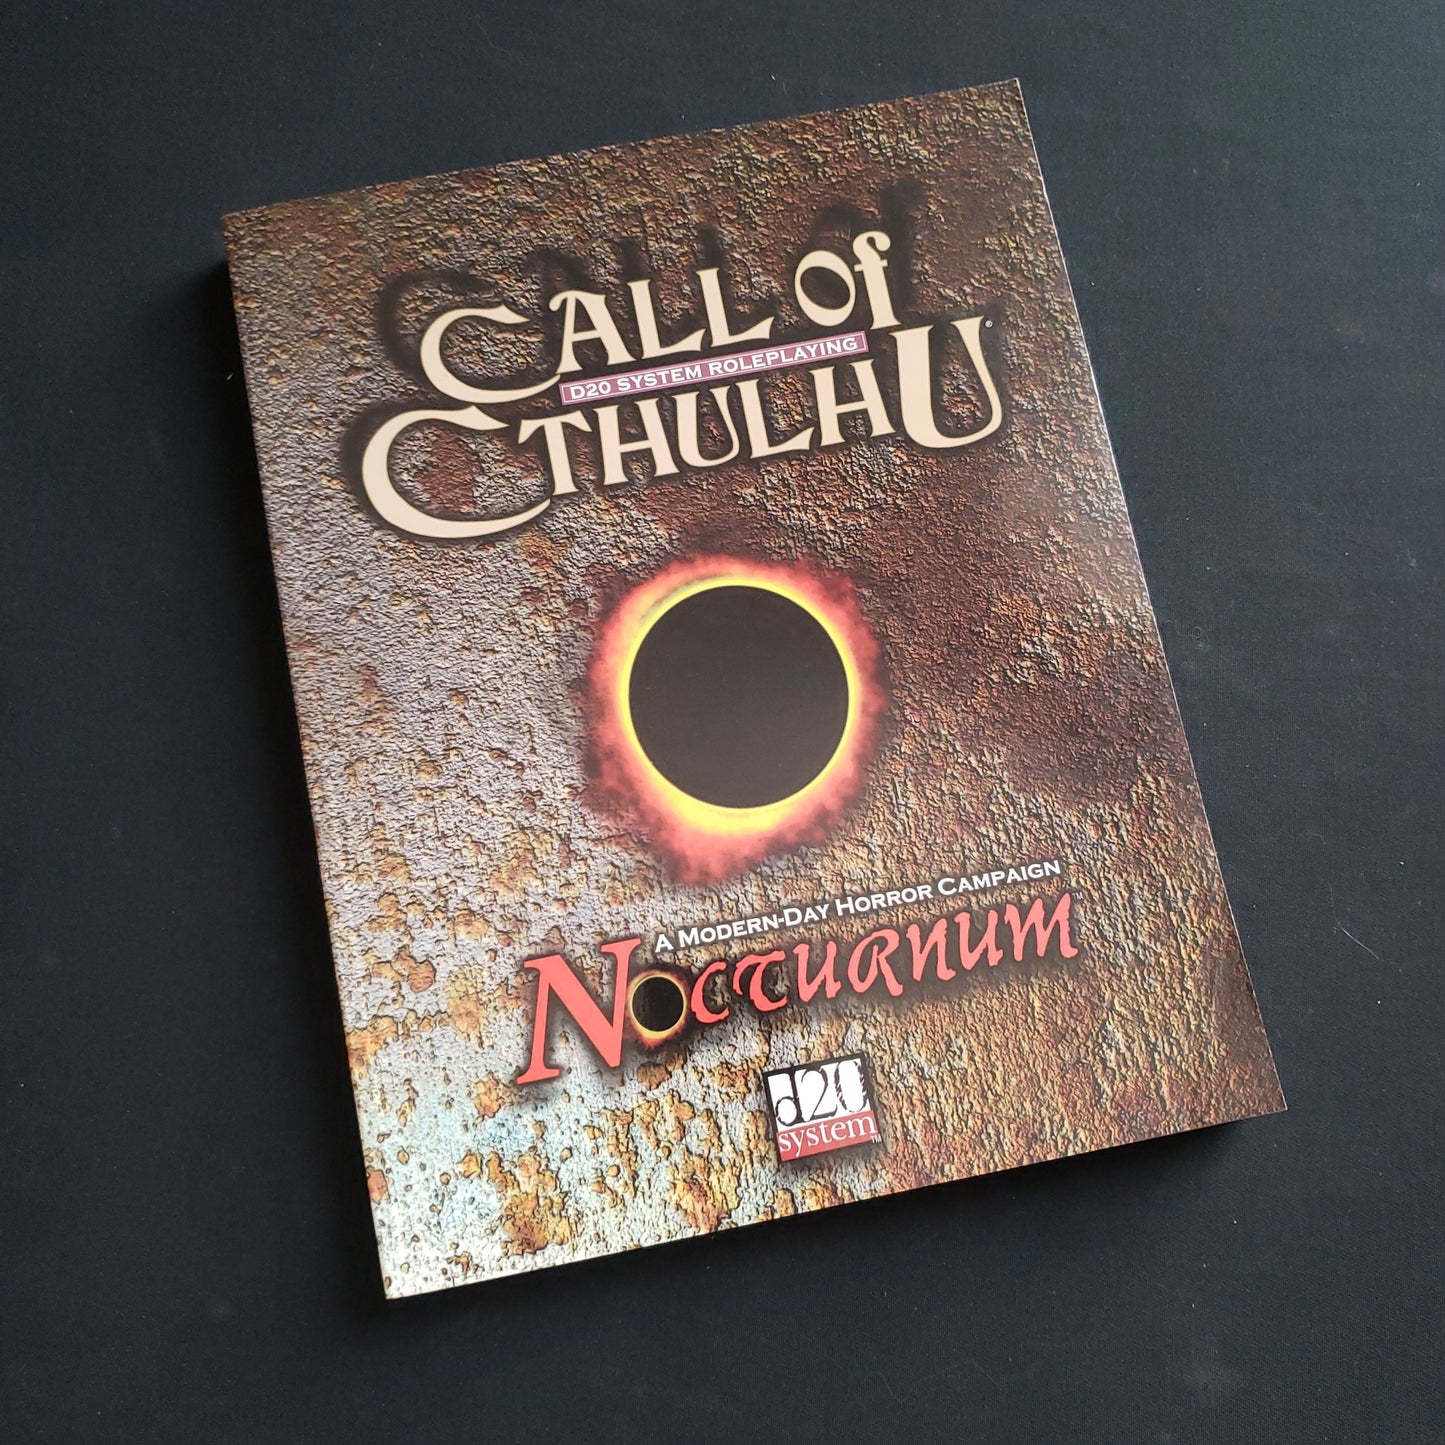 Image shows the front cover of the Call of Cthulhu: Nocturnum roleplaying game book